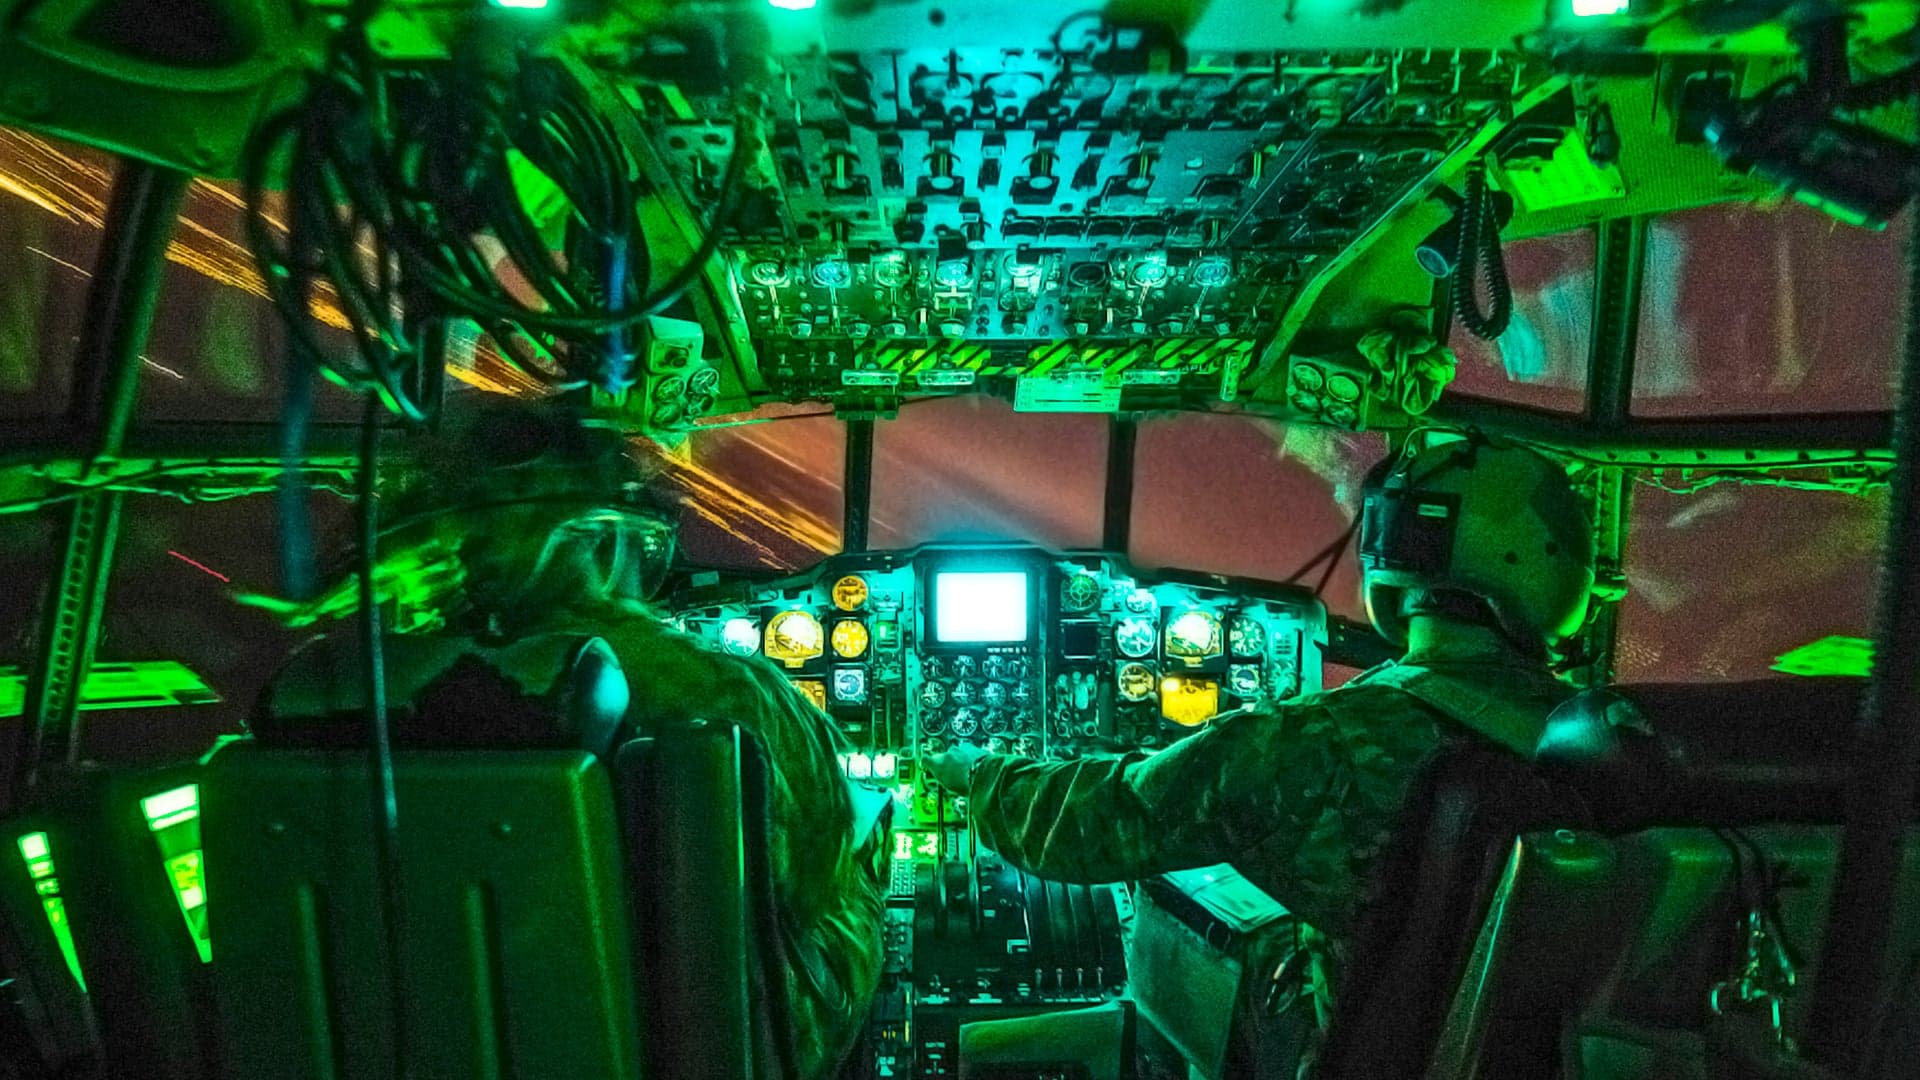 AC-130W Gunship Pilots Help Target The Enemy With An Off The Shelf Rifle Sight